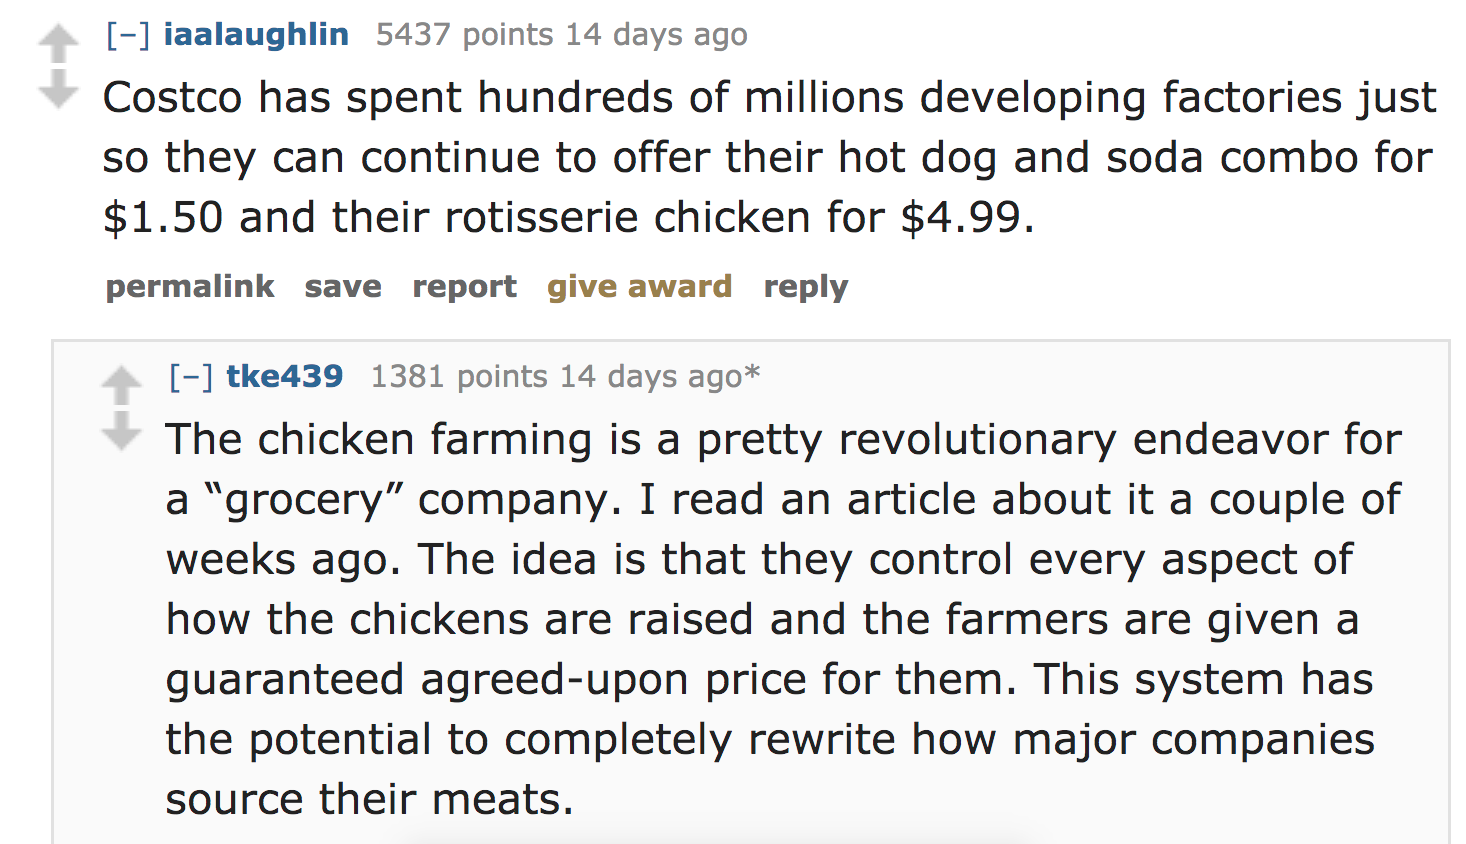 ask reddit facts - Costco has spent hundreds of millions developing factories just so they can continue to offer their hot dog and soda combo for $1.50 and their rotisserie chicken for $4.99. permalink save report give award tke439 1381…